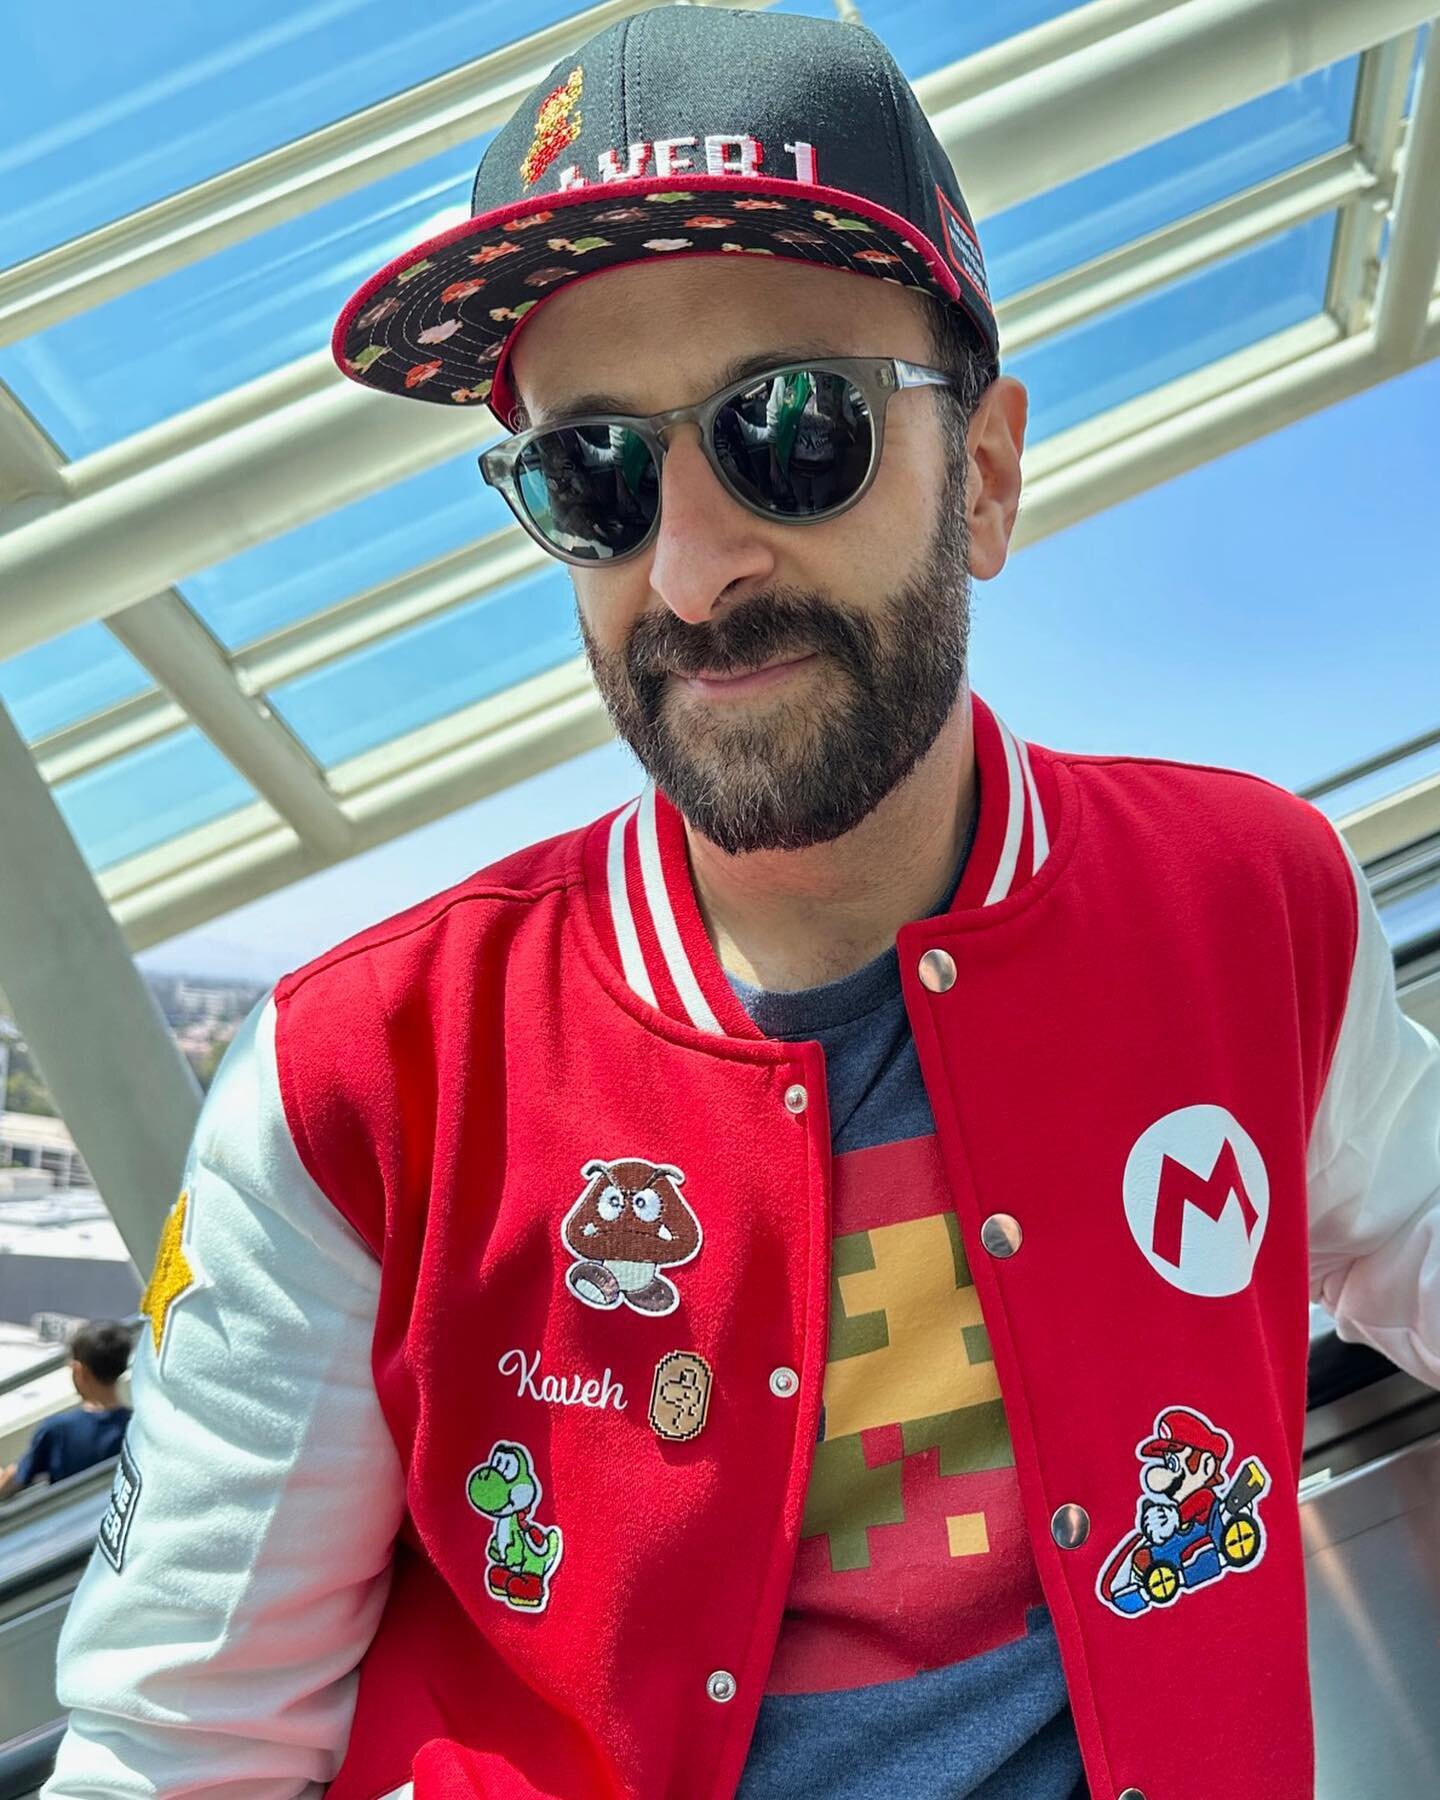 The 40 Year Old Virgin

Holy crap what a day. Just a minor, mini, mini photo dump. Please give @sarahdesigningthings props for the CUSTOM Mario jackets.